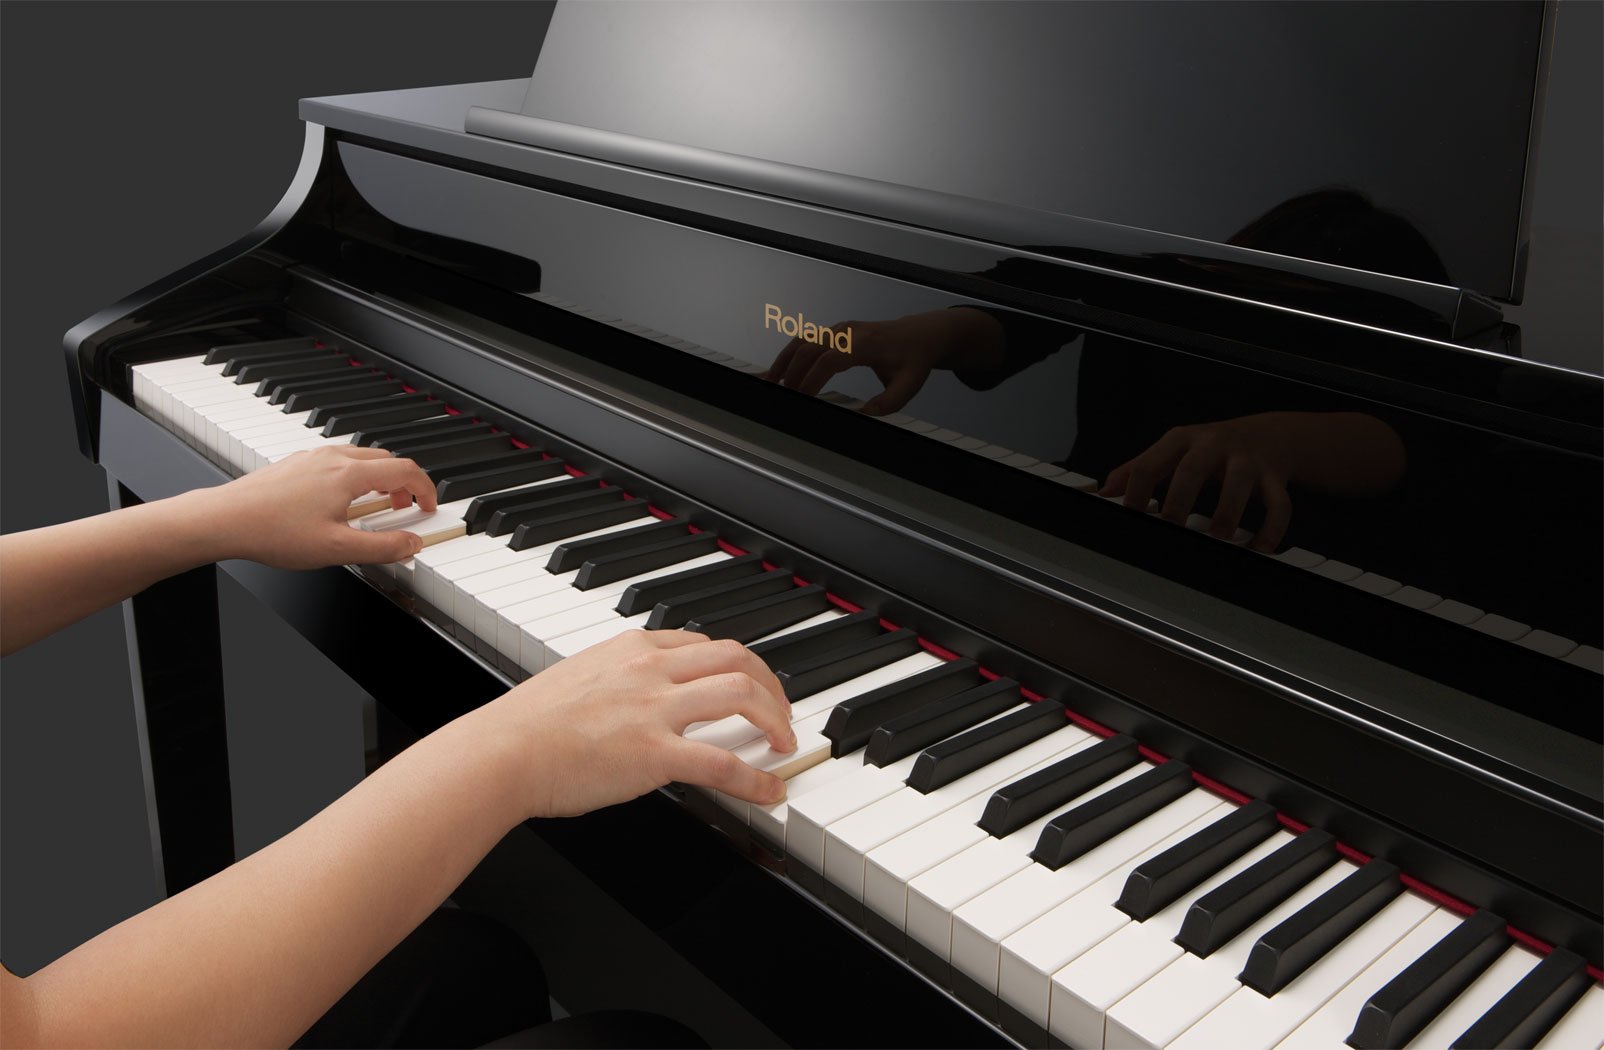 Things to keep in mind if you are going to take piano lessons